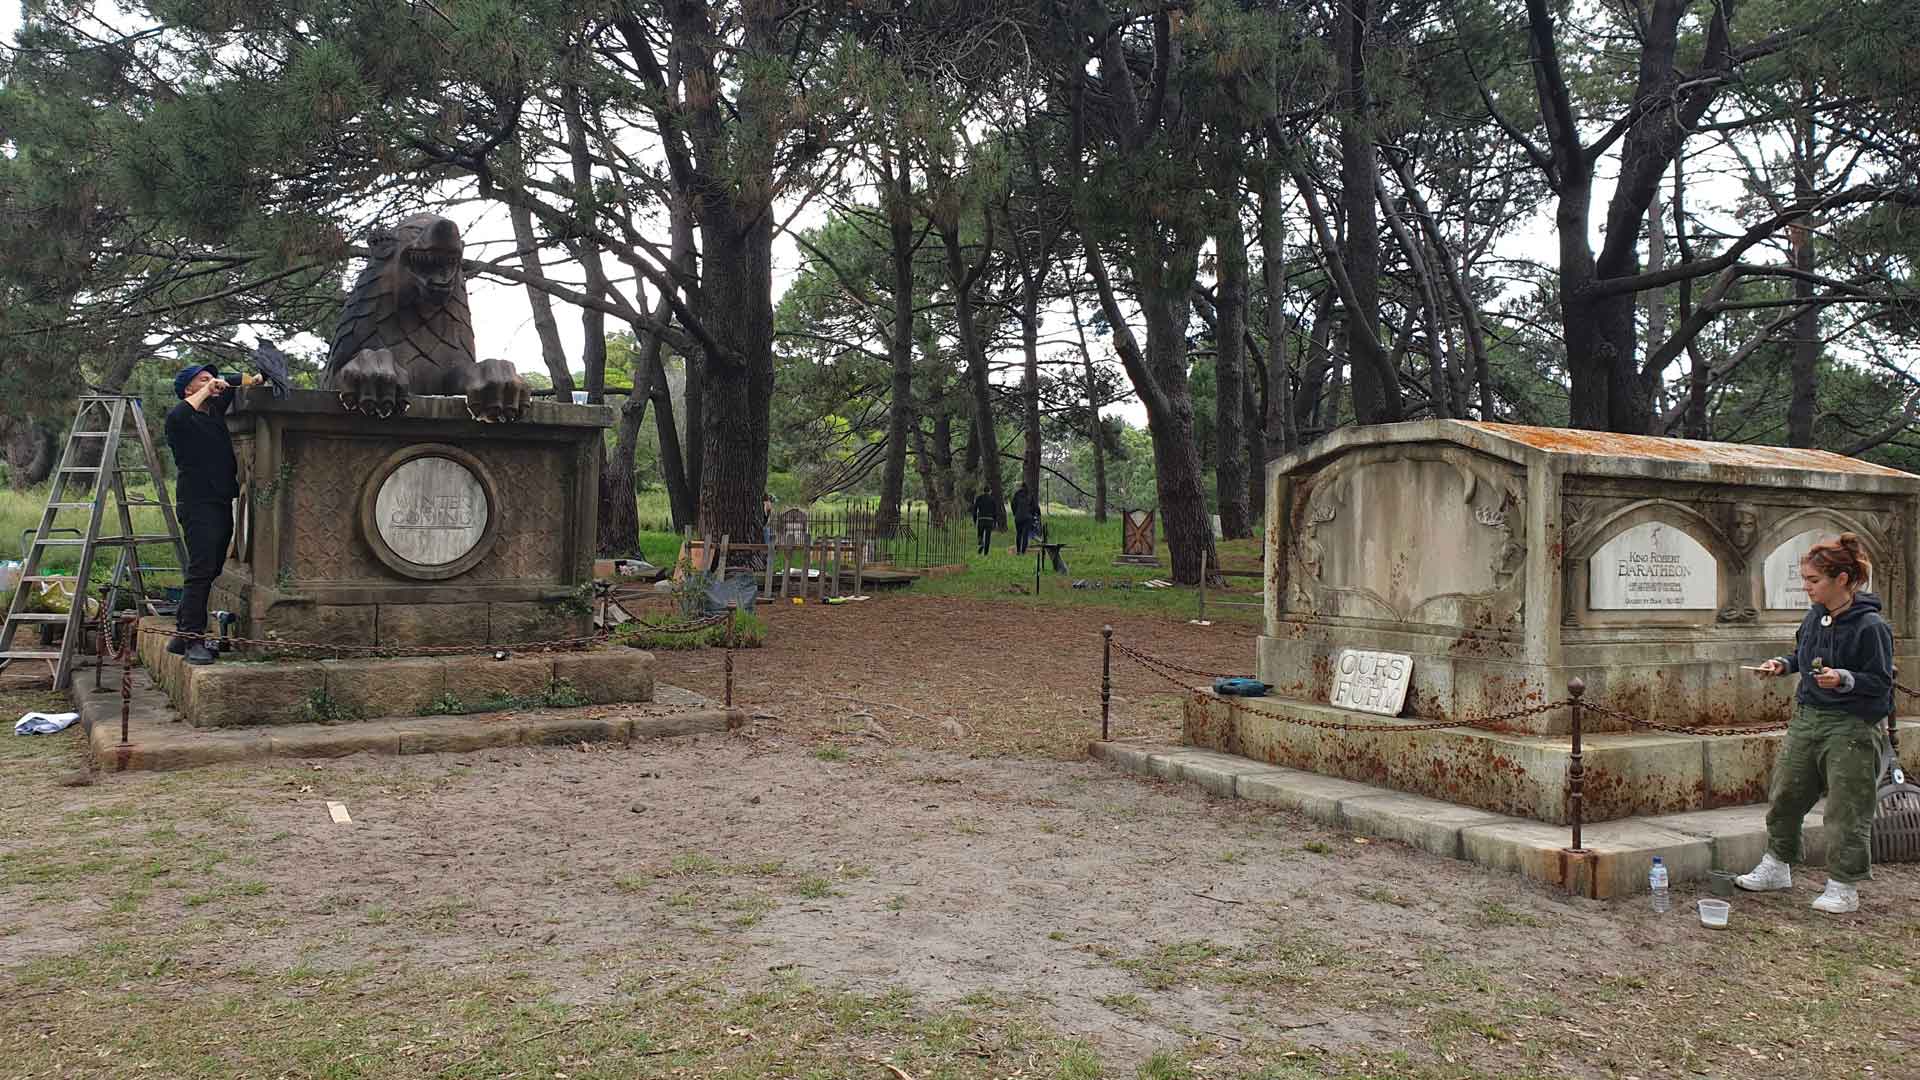 An Ominous 'Game of Thrones' Graveyard Has Popped Up in Centennial Park